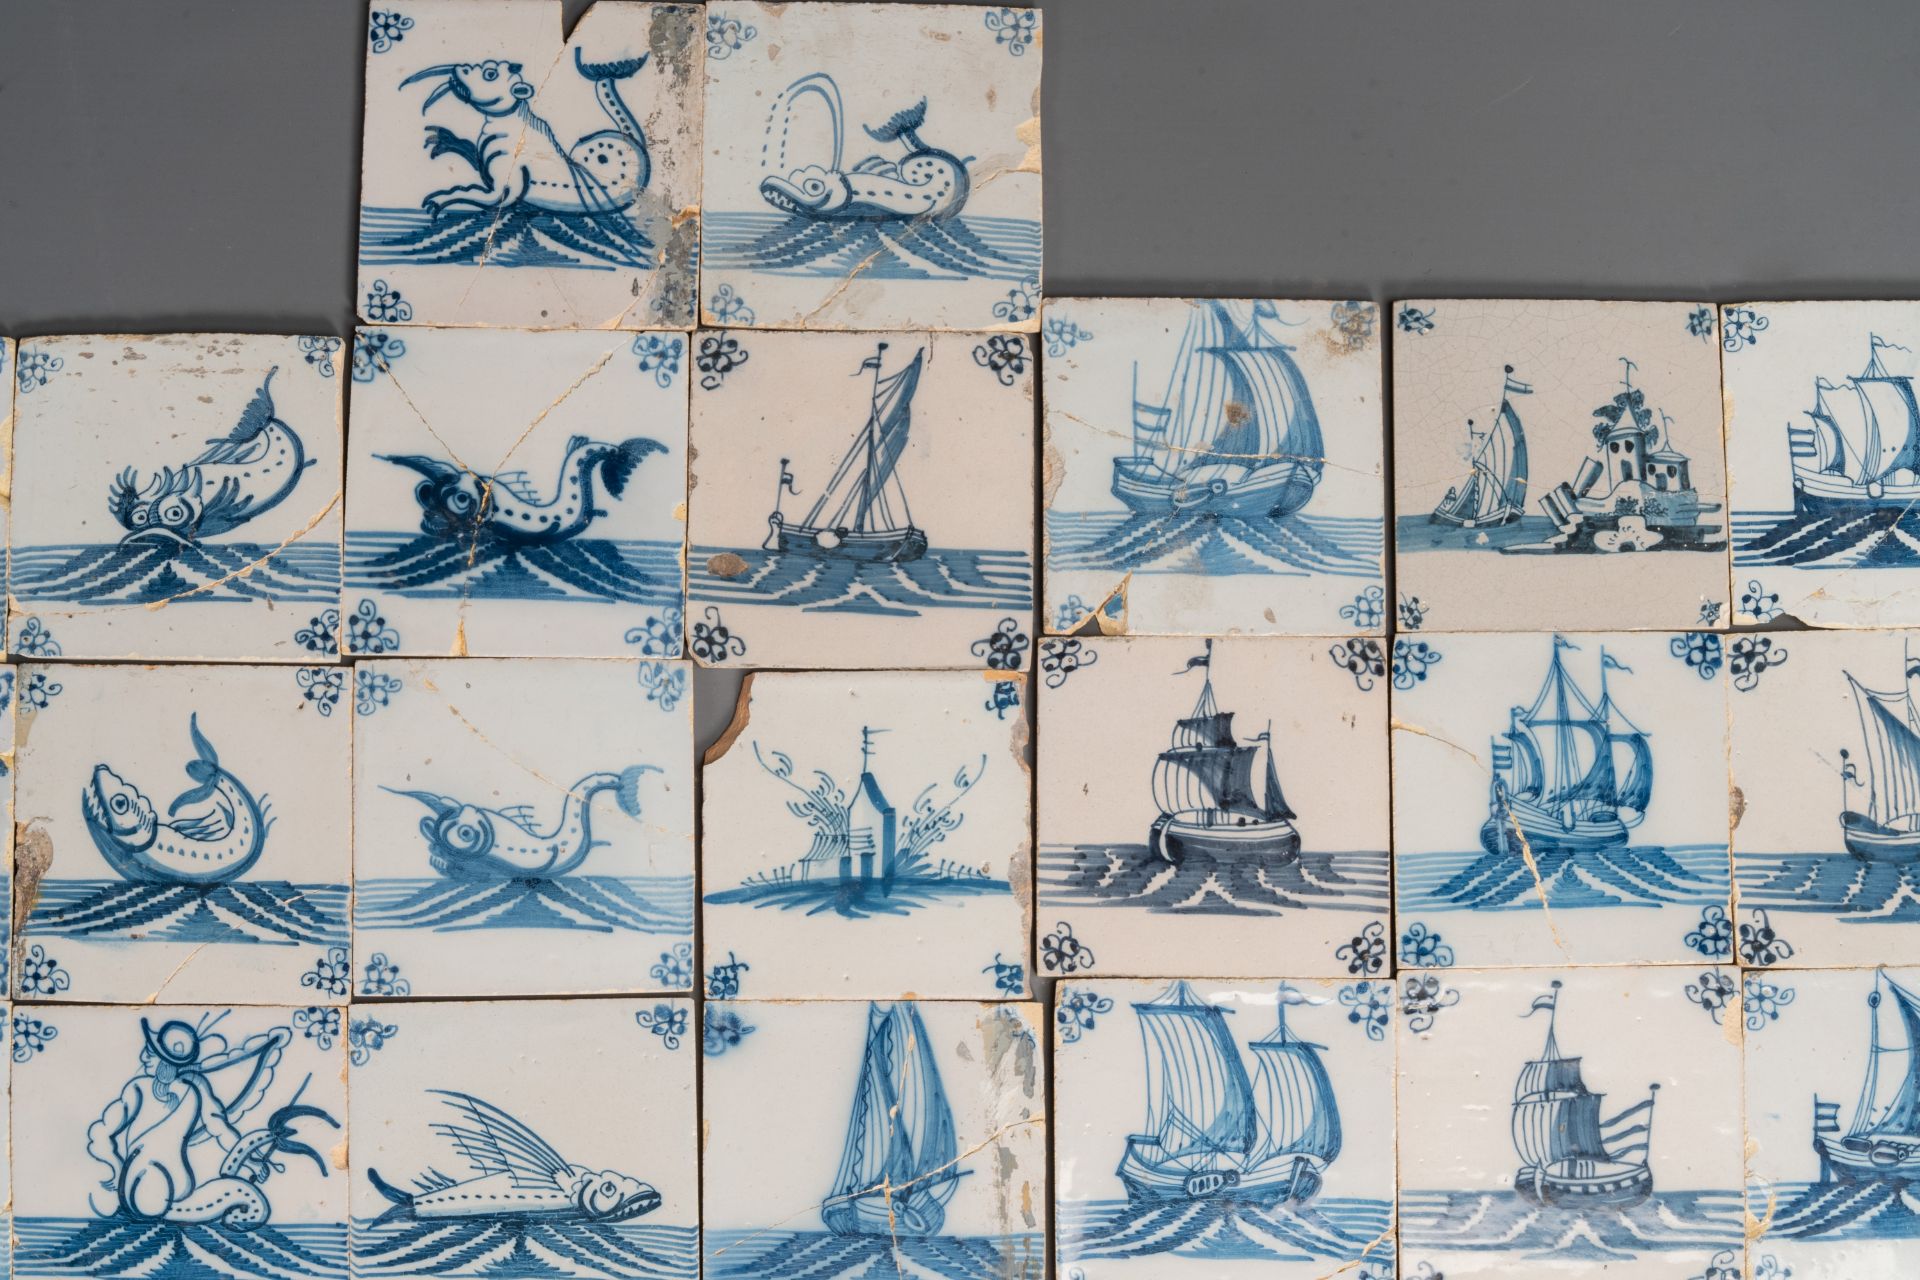 92 blue and white Dutch Delft tiles with sea monsters and ships, 18th C. - Image 10 of 16